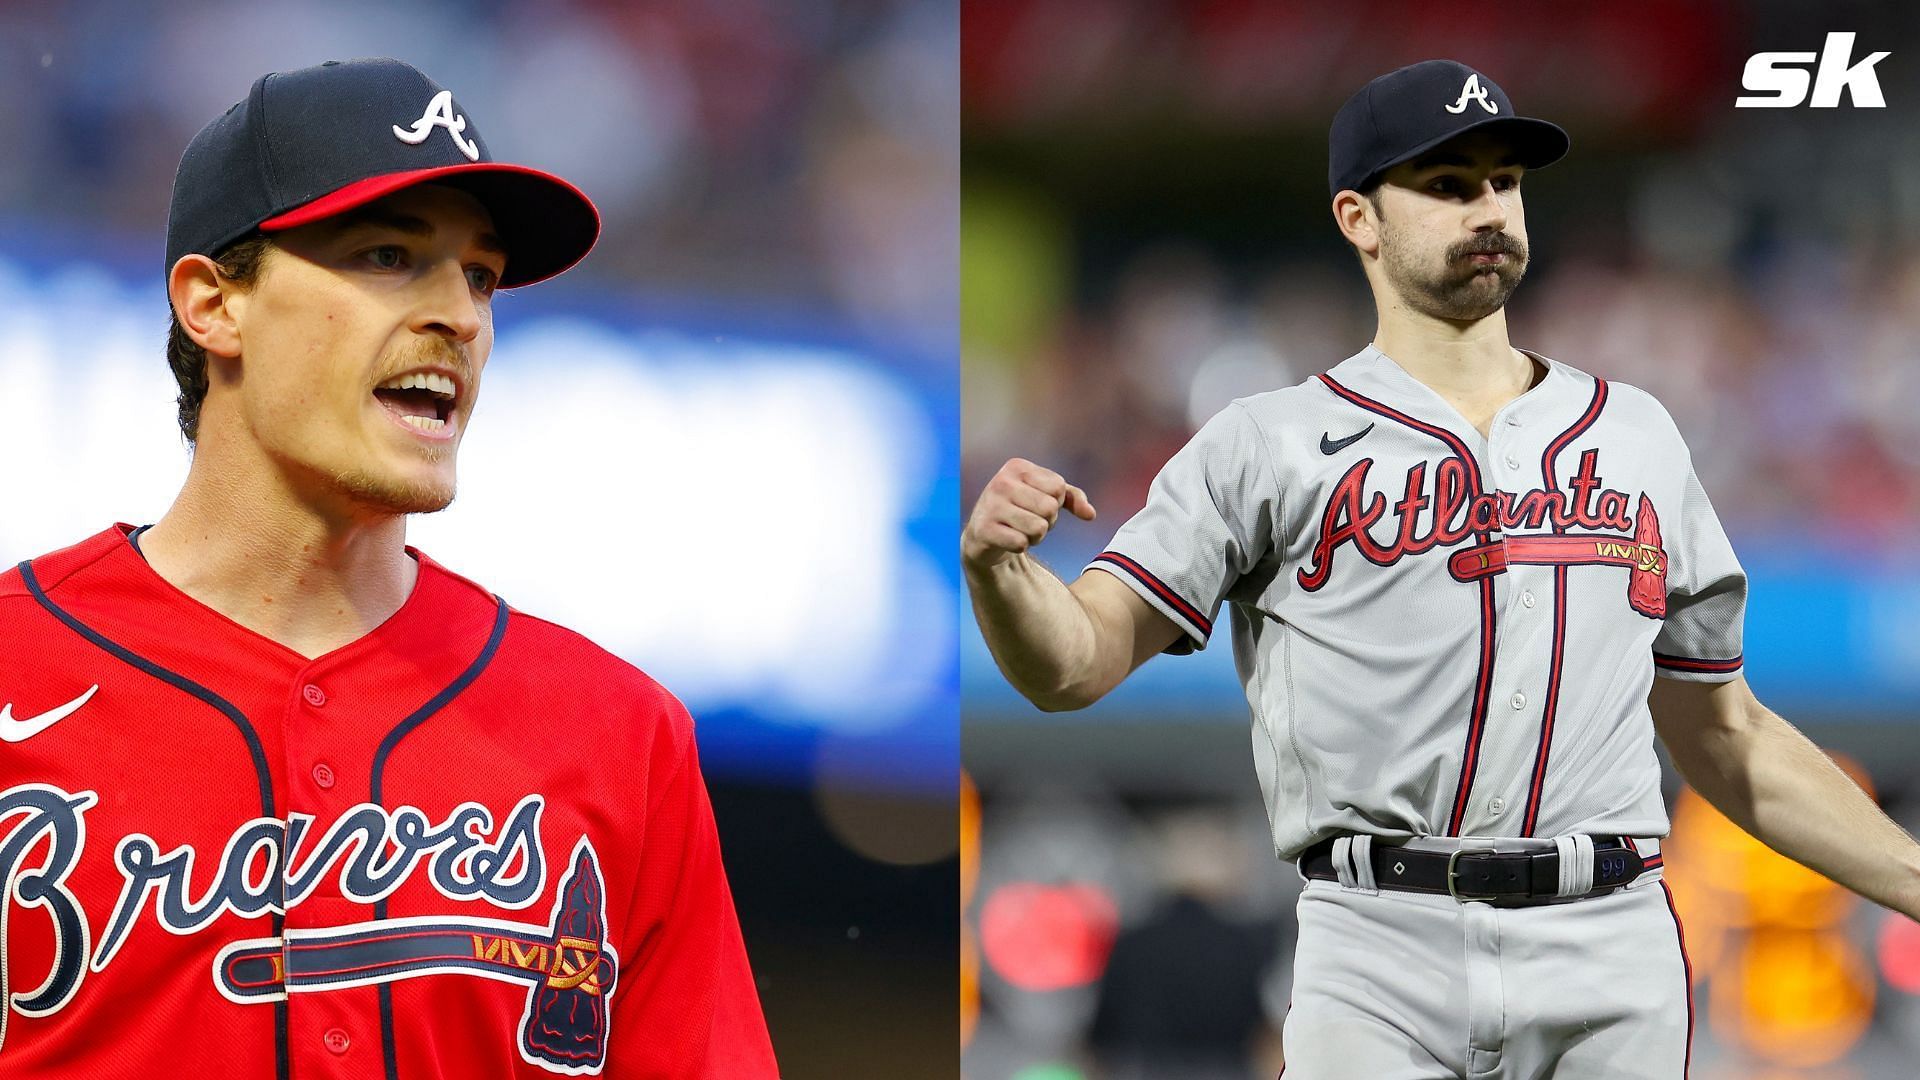 An MLB analyst has raised concerns about the Atlanta Braves